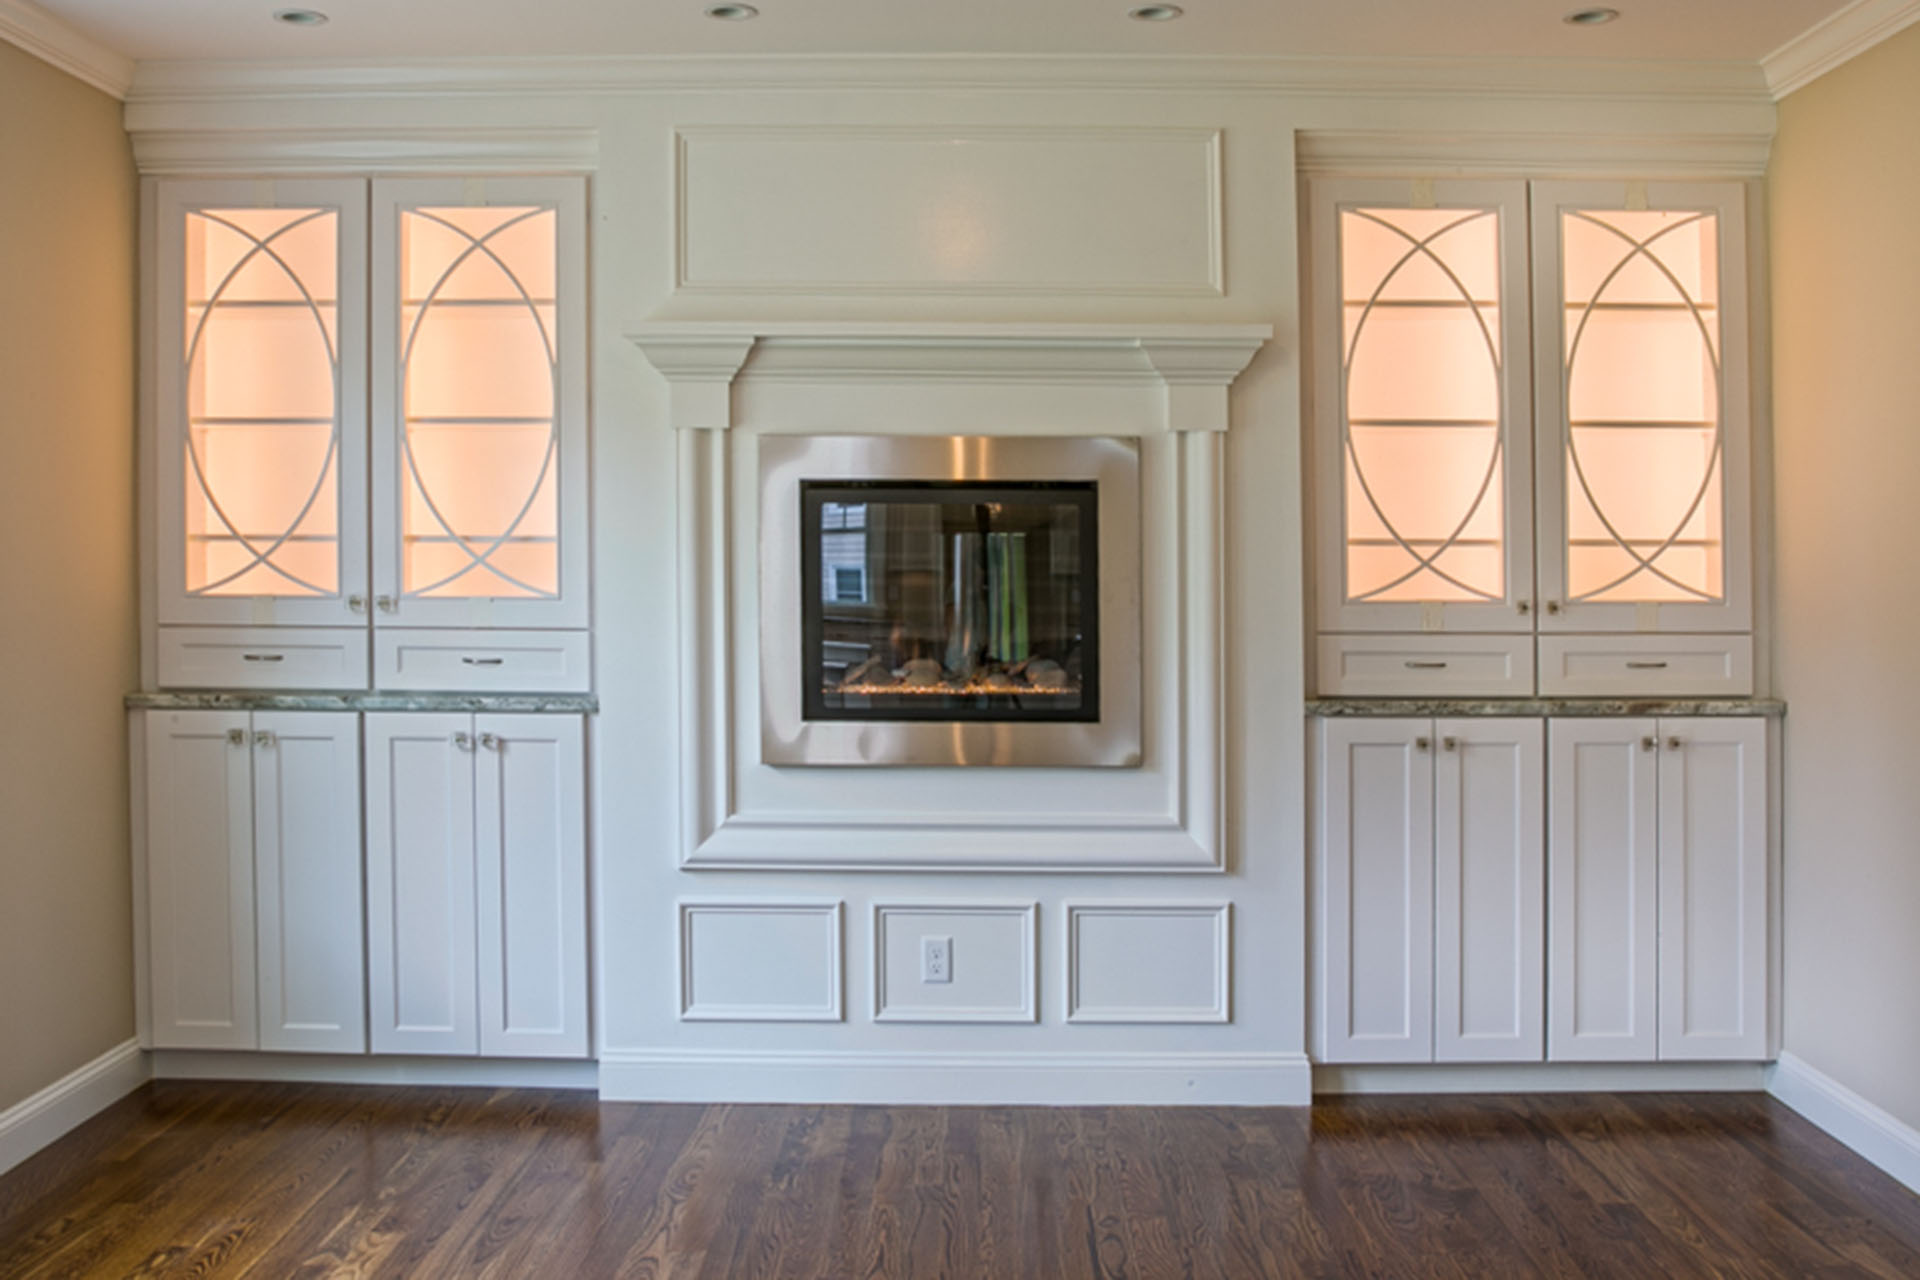 Beautiful Cabinet Space with Fireplace Insert